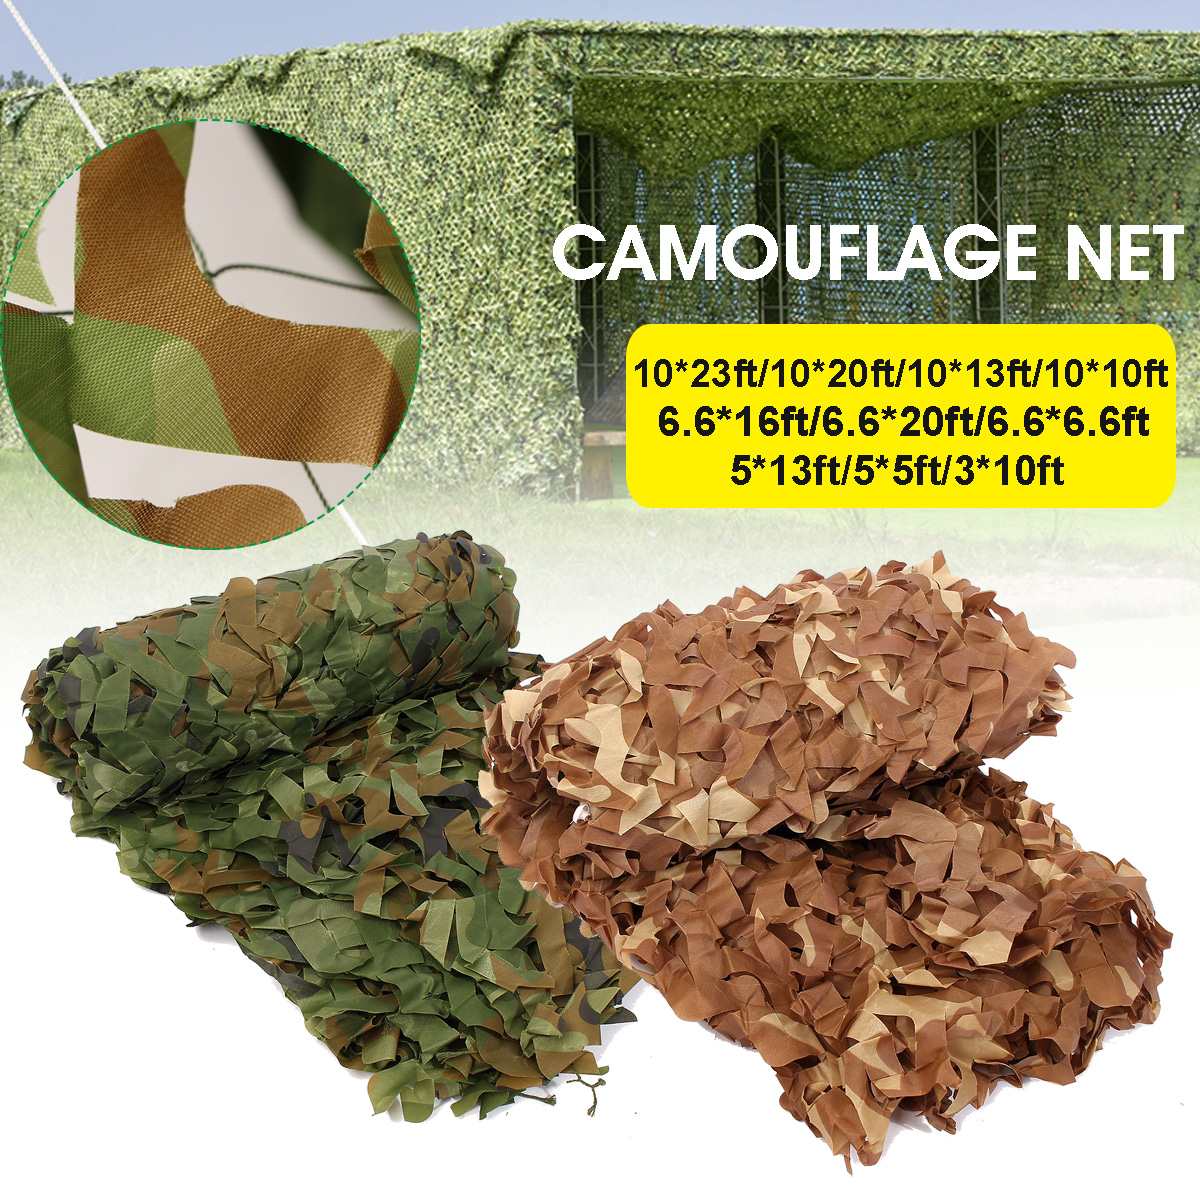 16ft/23ft Camouflage Netting Camo Army Net Woodland Camping Hunting Cover Shade 